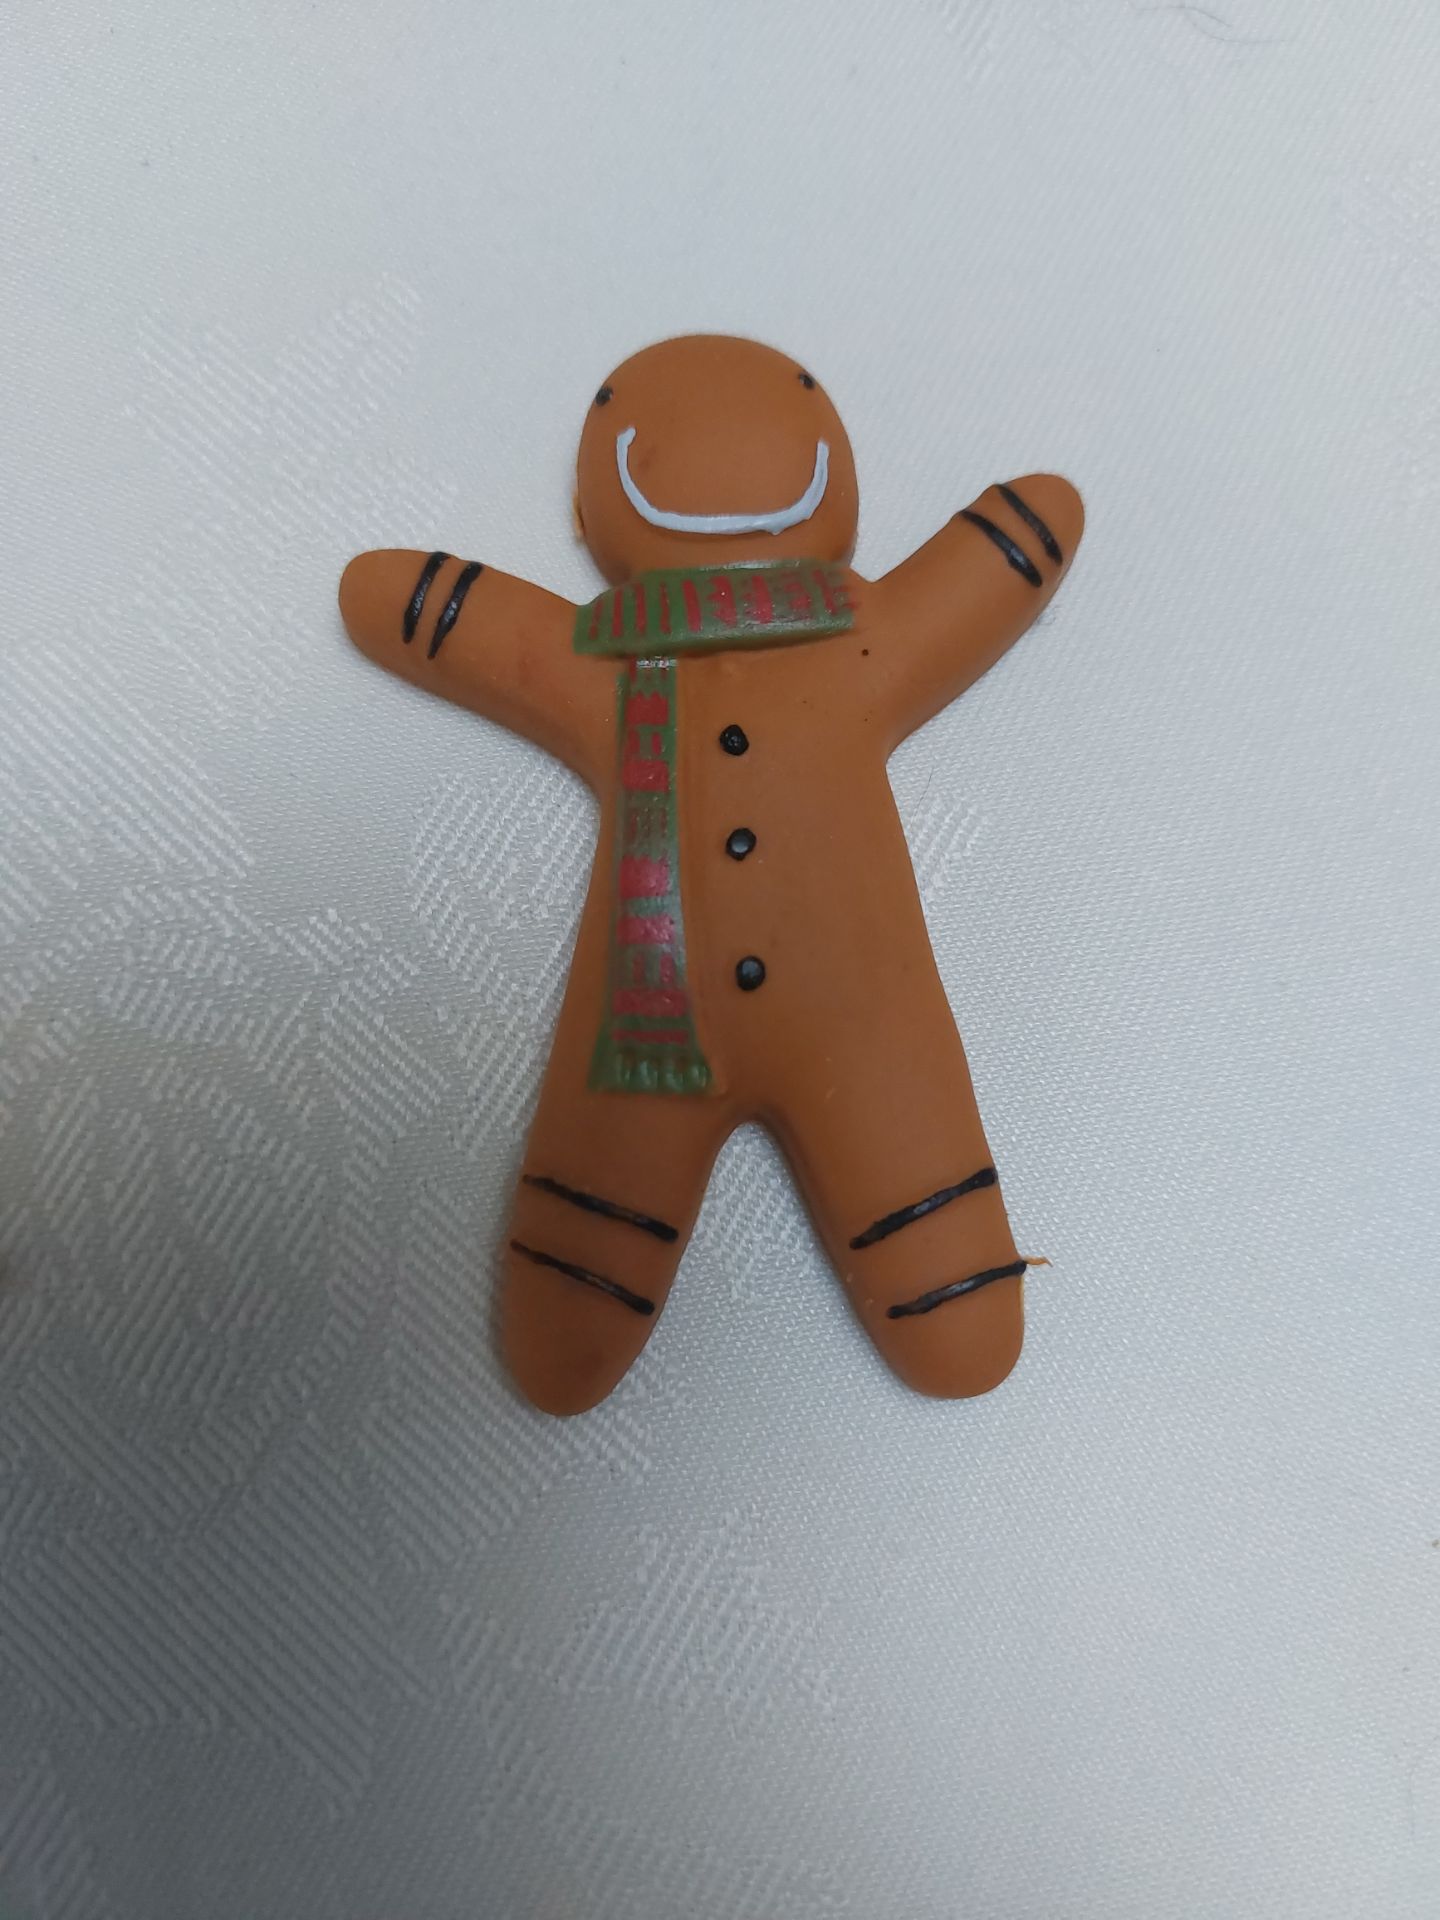 Christmas Novelty Giant Gingerbread Eraser. Approx. 4 Inches Tall. RRP £5 each, Box of 10